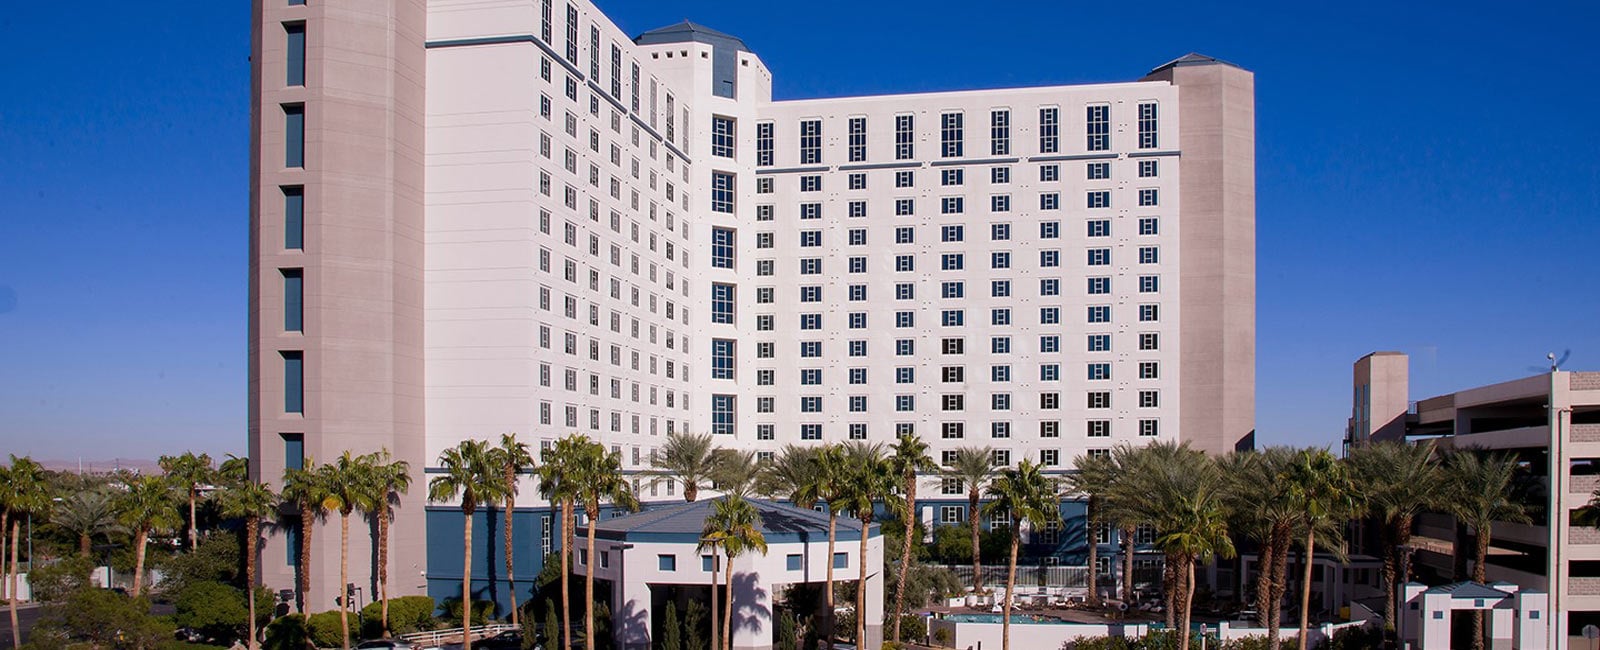 Exterior of Hilton Grand Vacations on Paradise in Las Vegas, Nevada